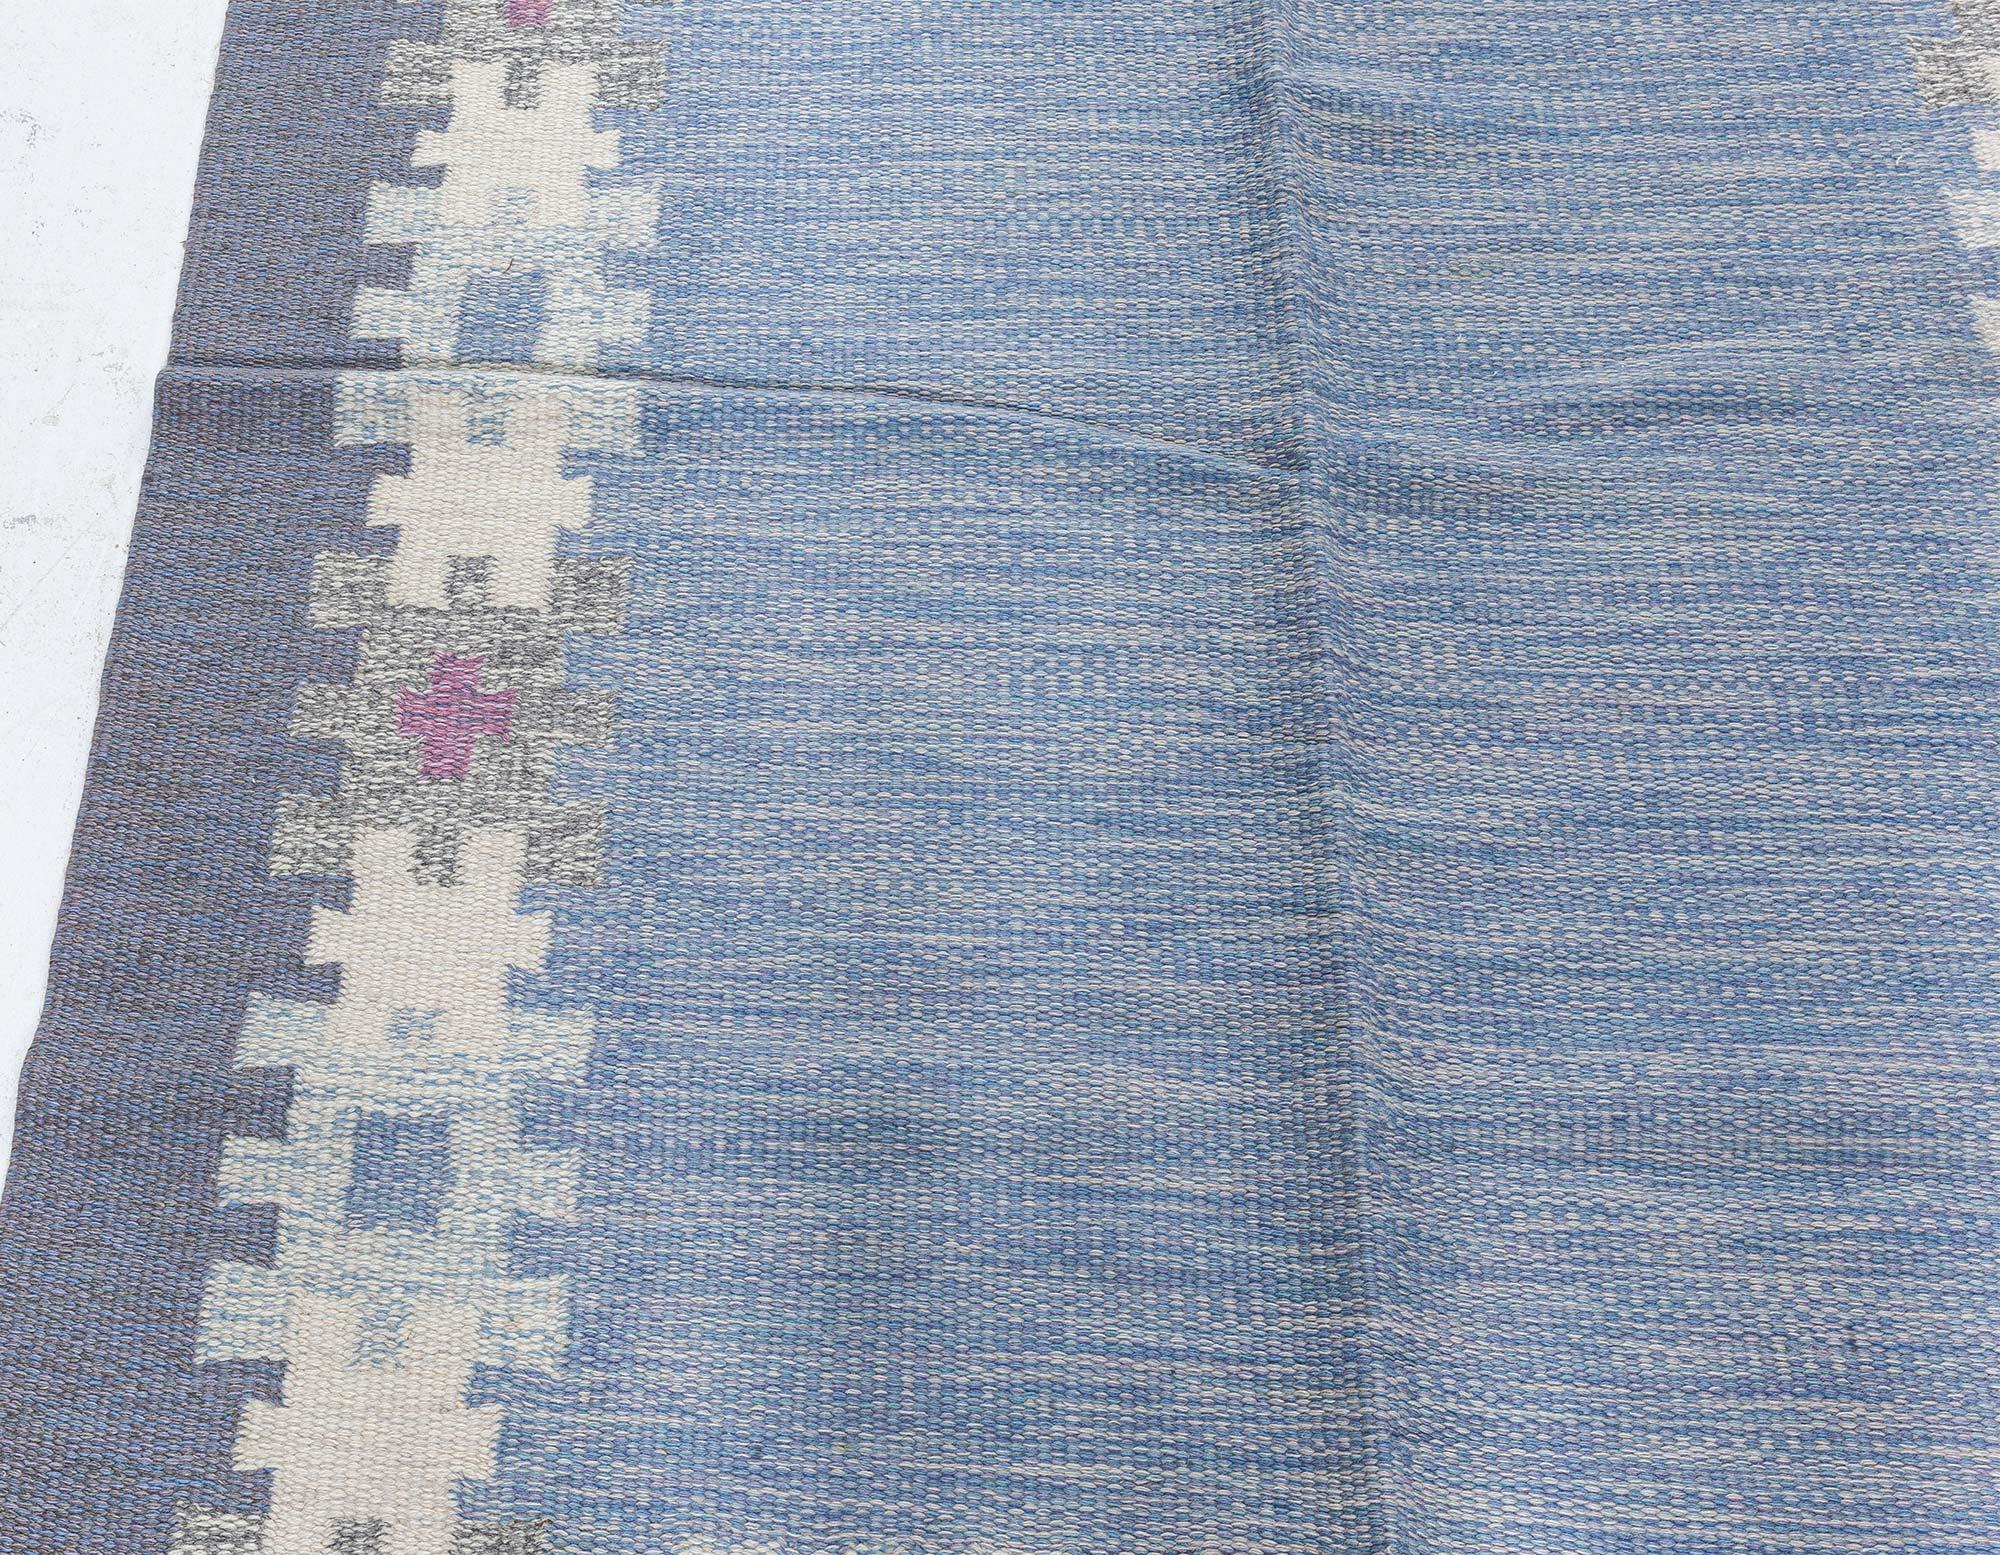 Midcentury Swedish Blue Rug by Ingegerd Silow Woven I.S For Sale 2